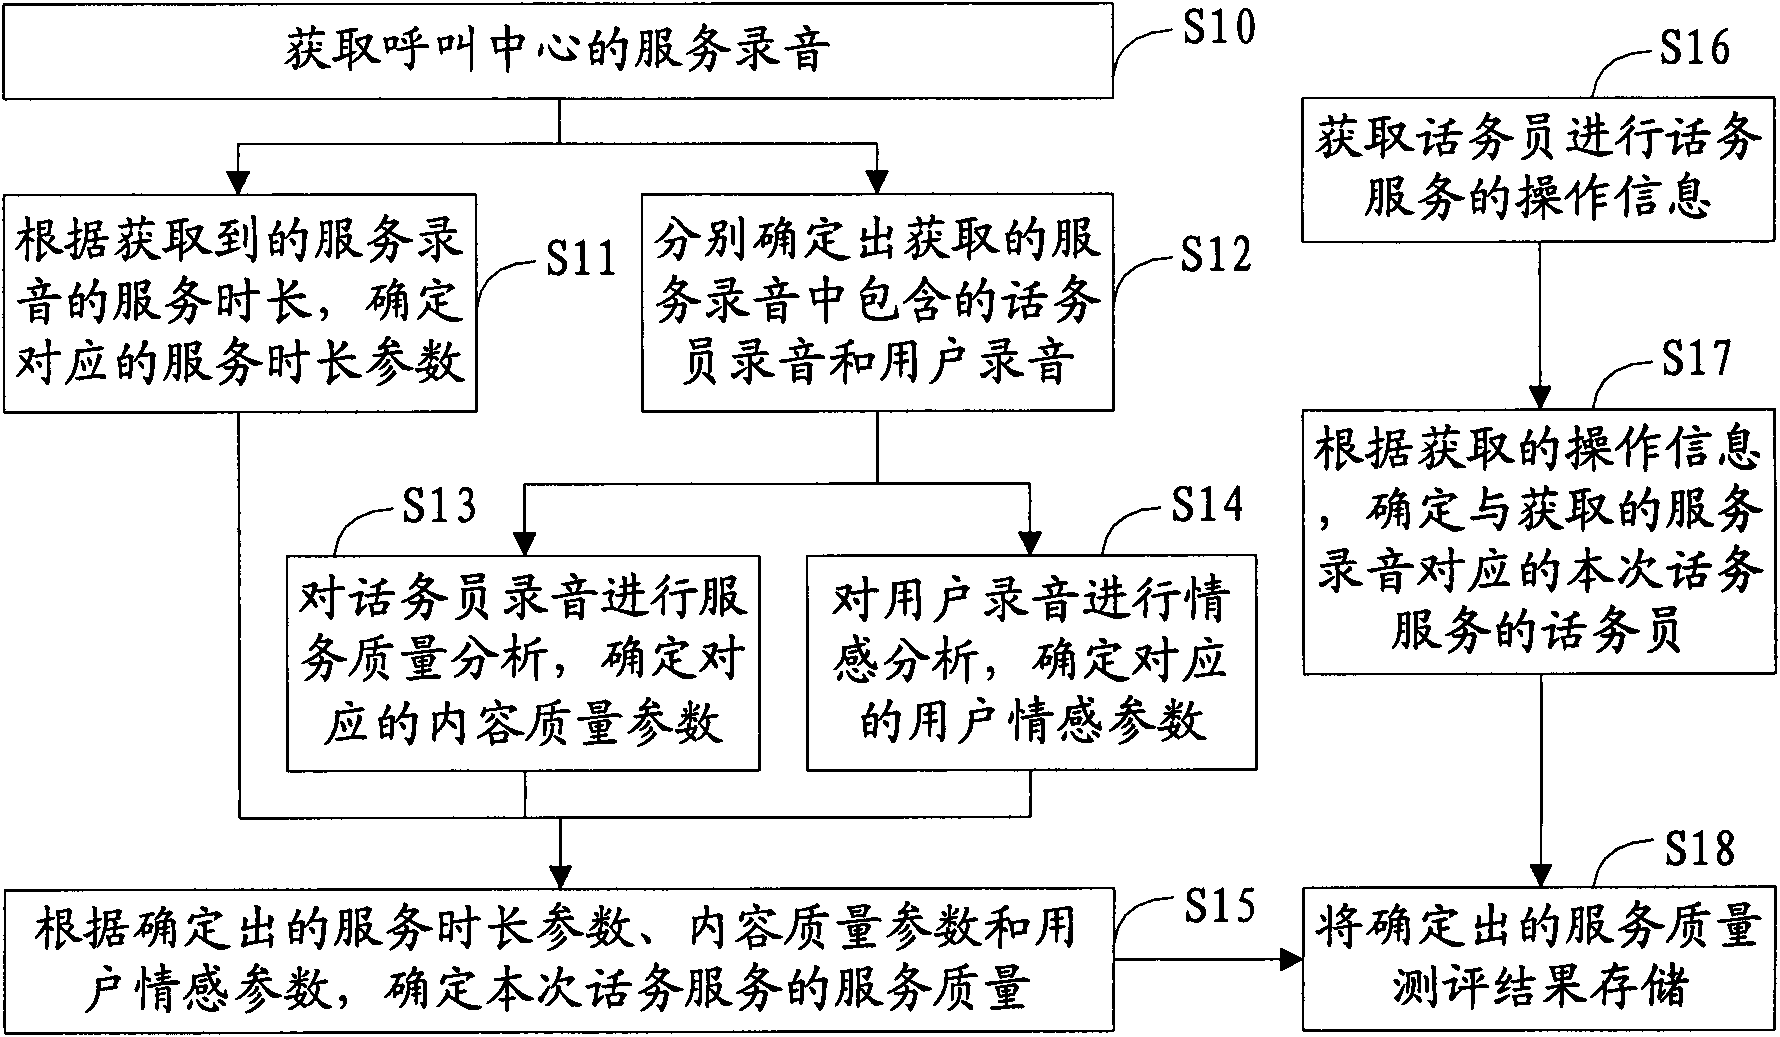 Method and system for service quality detection for call center